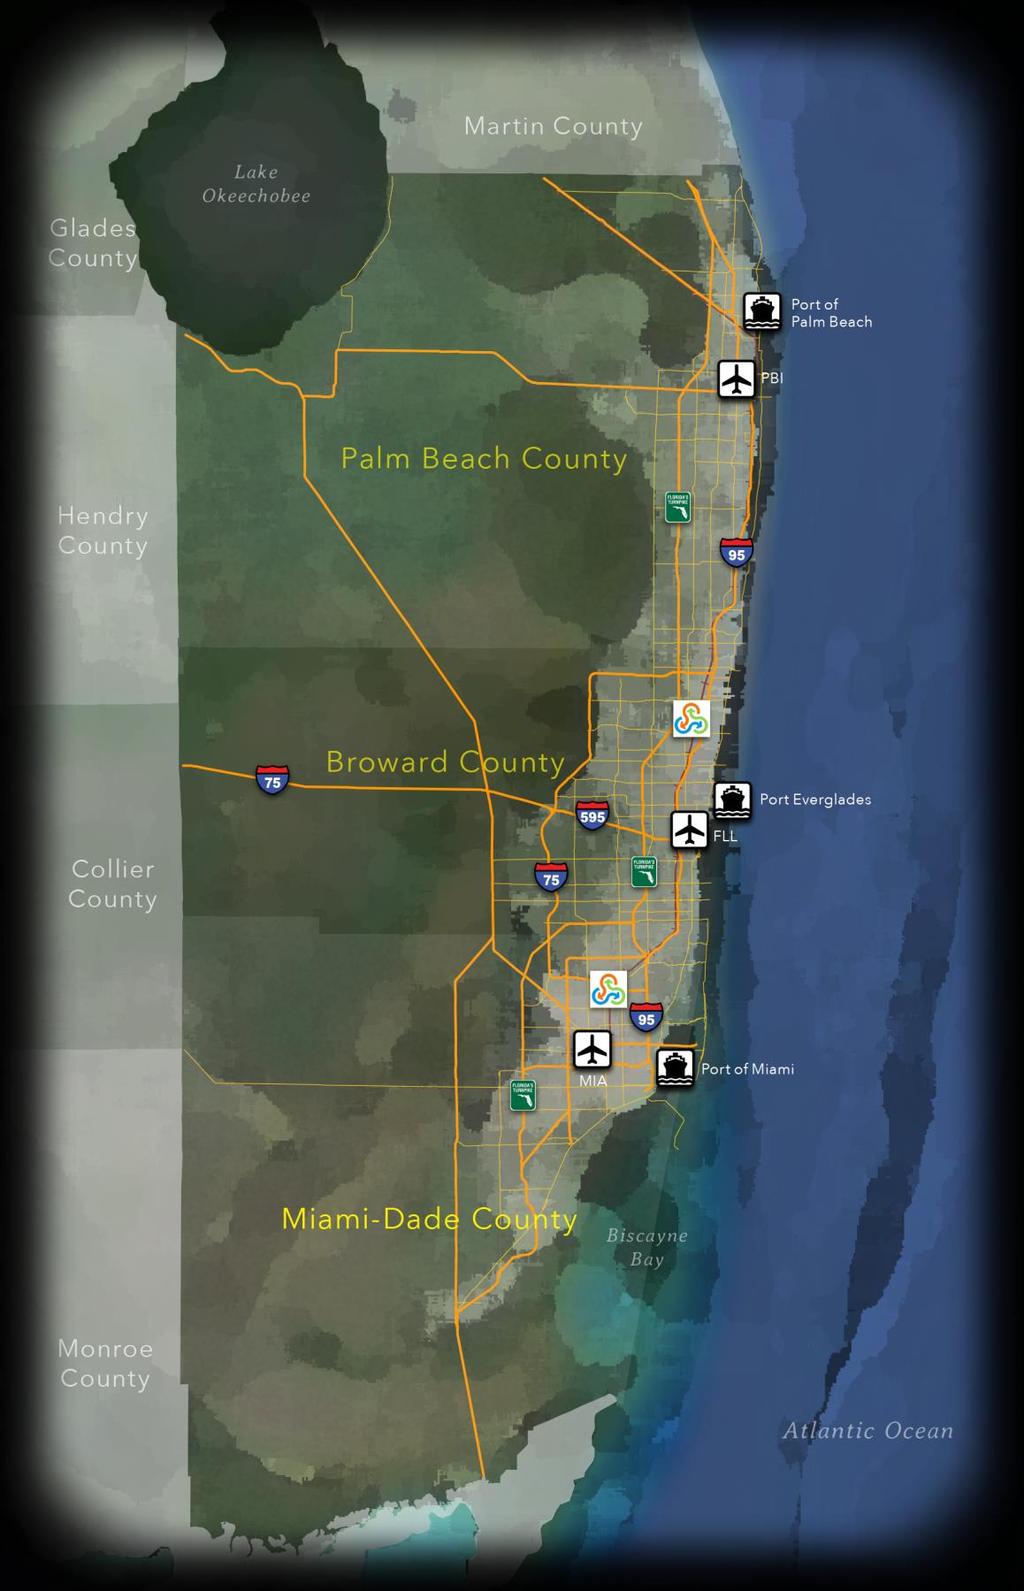 The Southeast Florida Region (See Appendix A for statistics